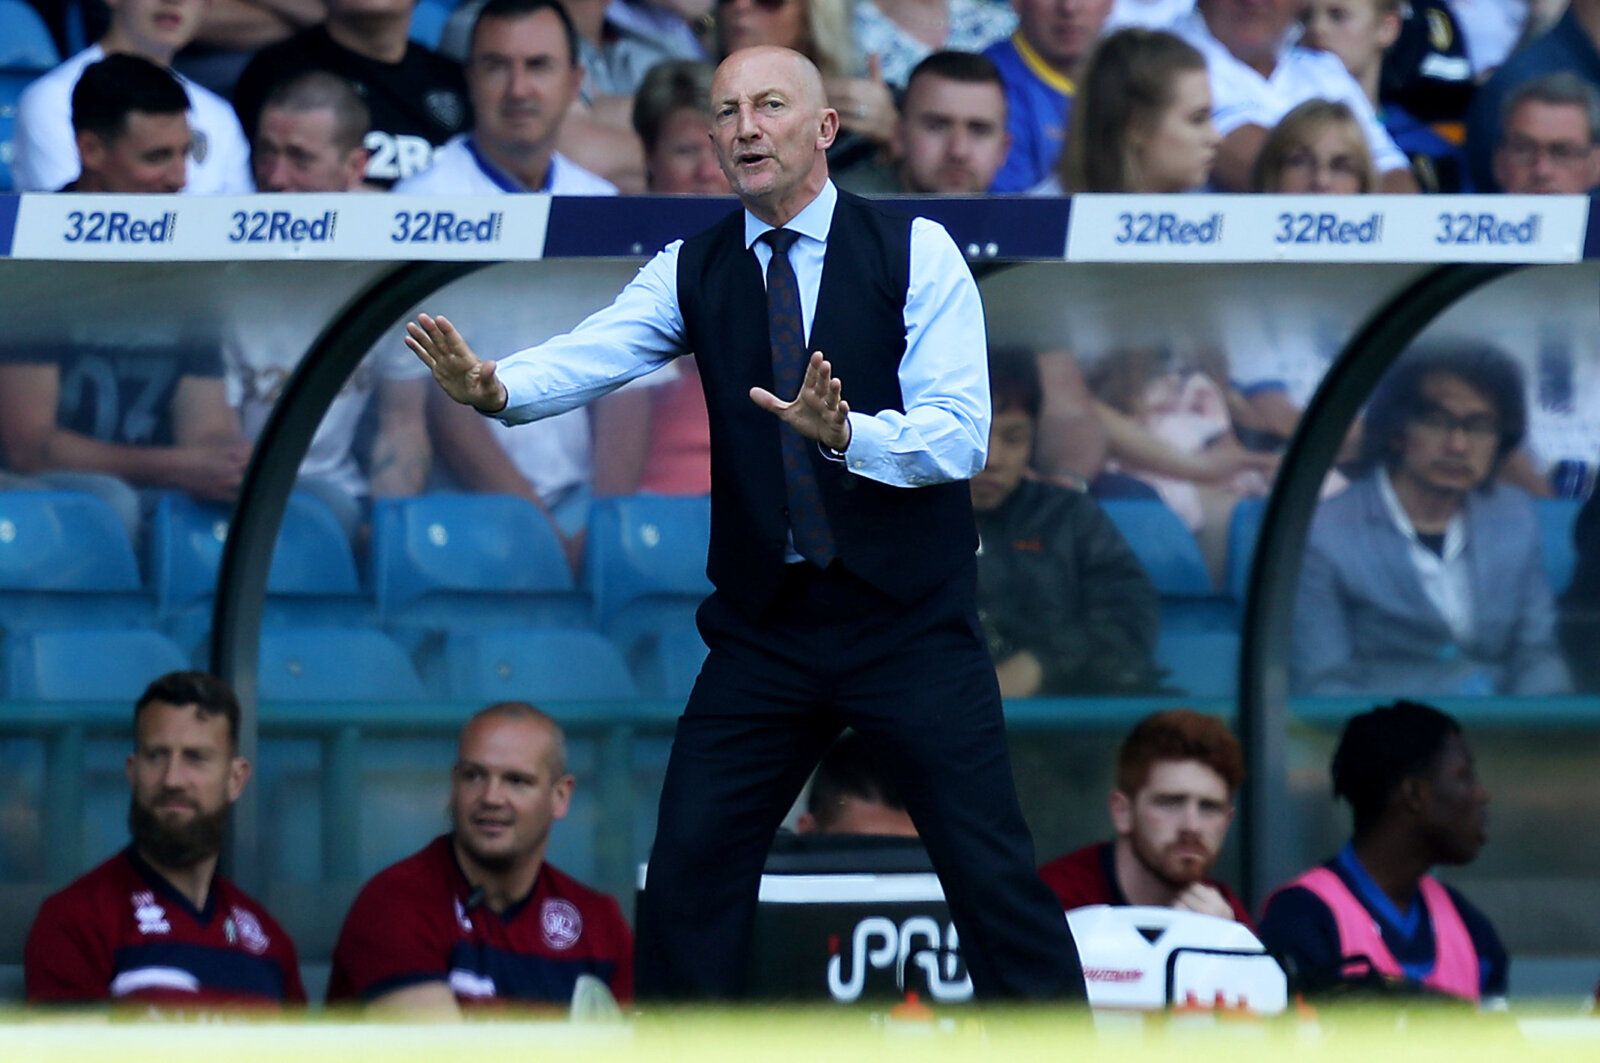 Soccer Football - Championship - Leeds United vs Queens Park Rangers - Elland Road, Leeds, Britain - May 6, 2018   Queens Park Rangers' manager Ian Holloway   Action Images/John Clifton    EDITORIAL USE ONLY. No use with unauthorized audio, video, data, fixture lists, club/league logos or 